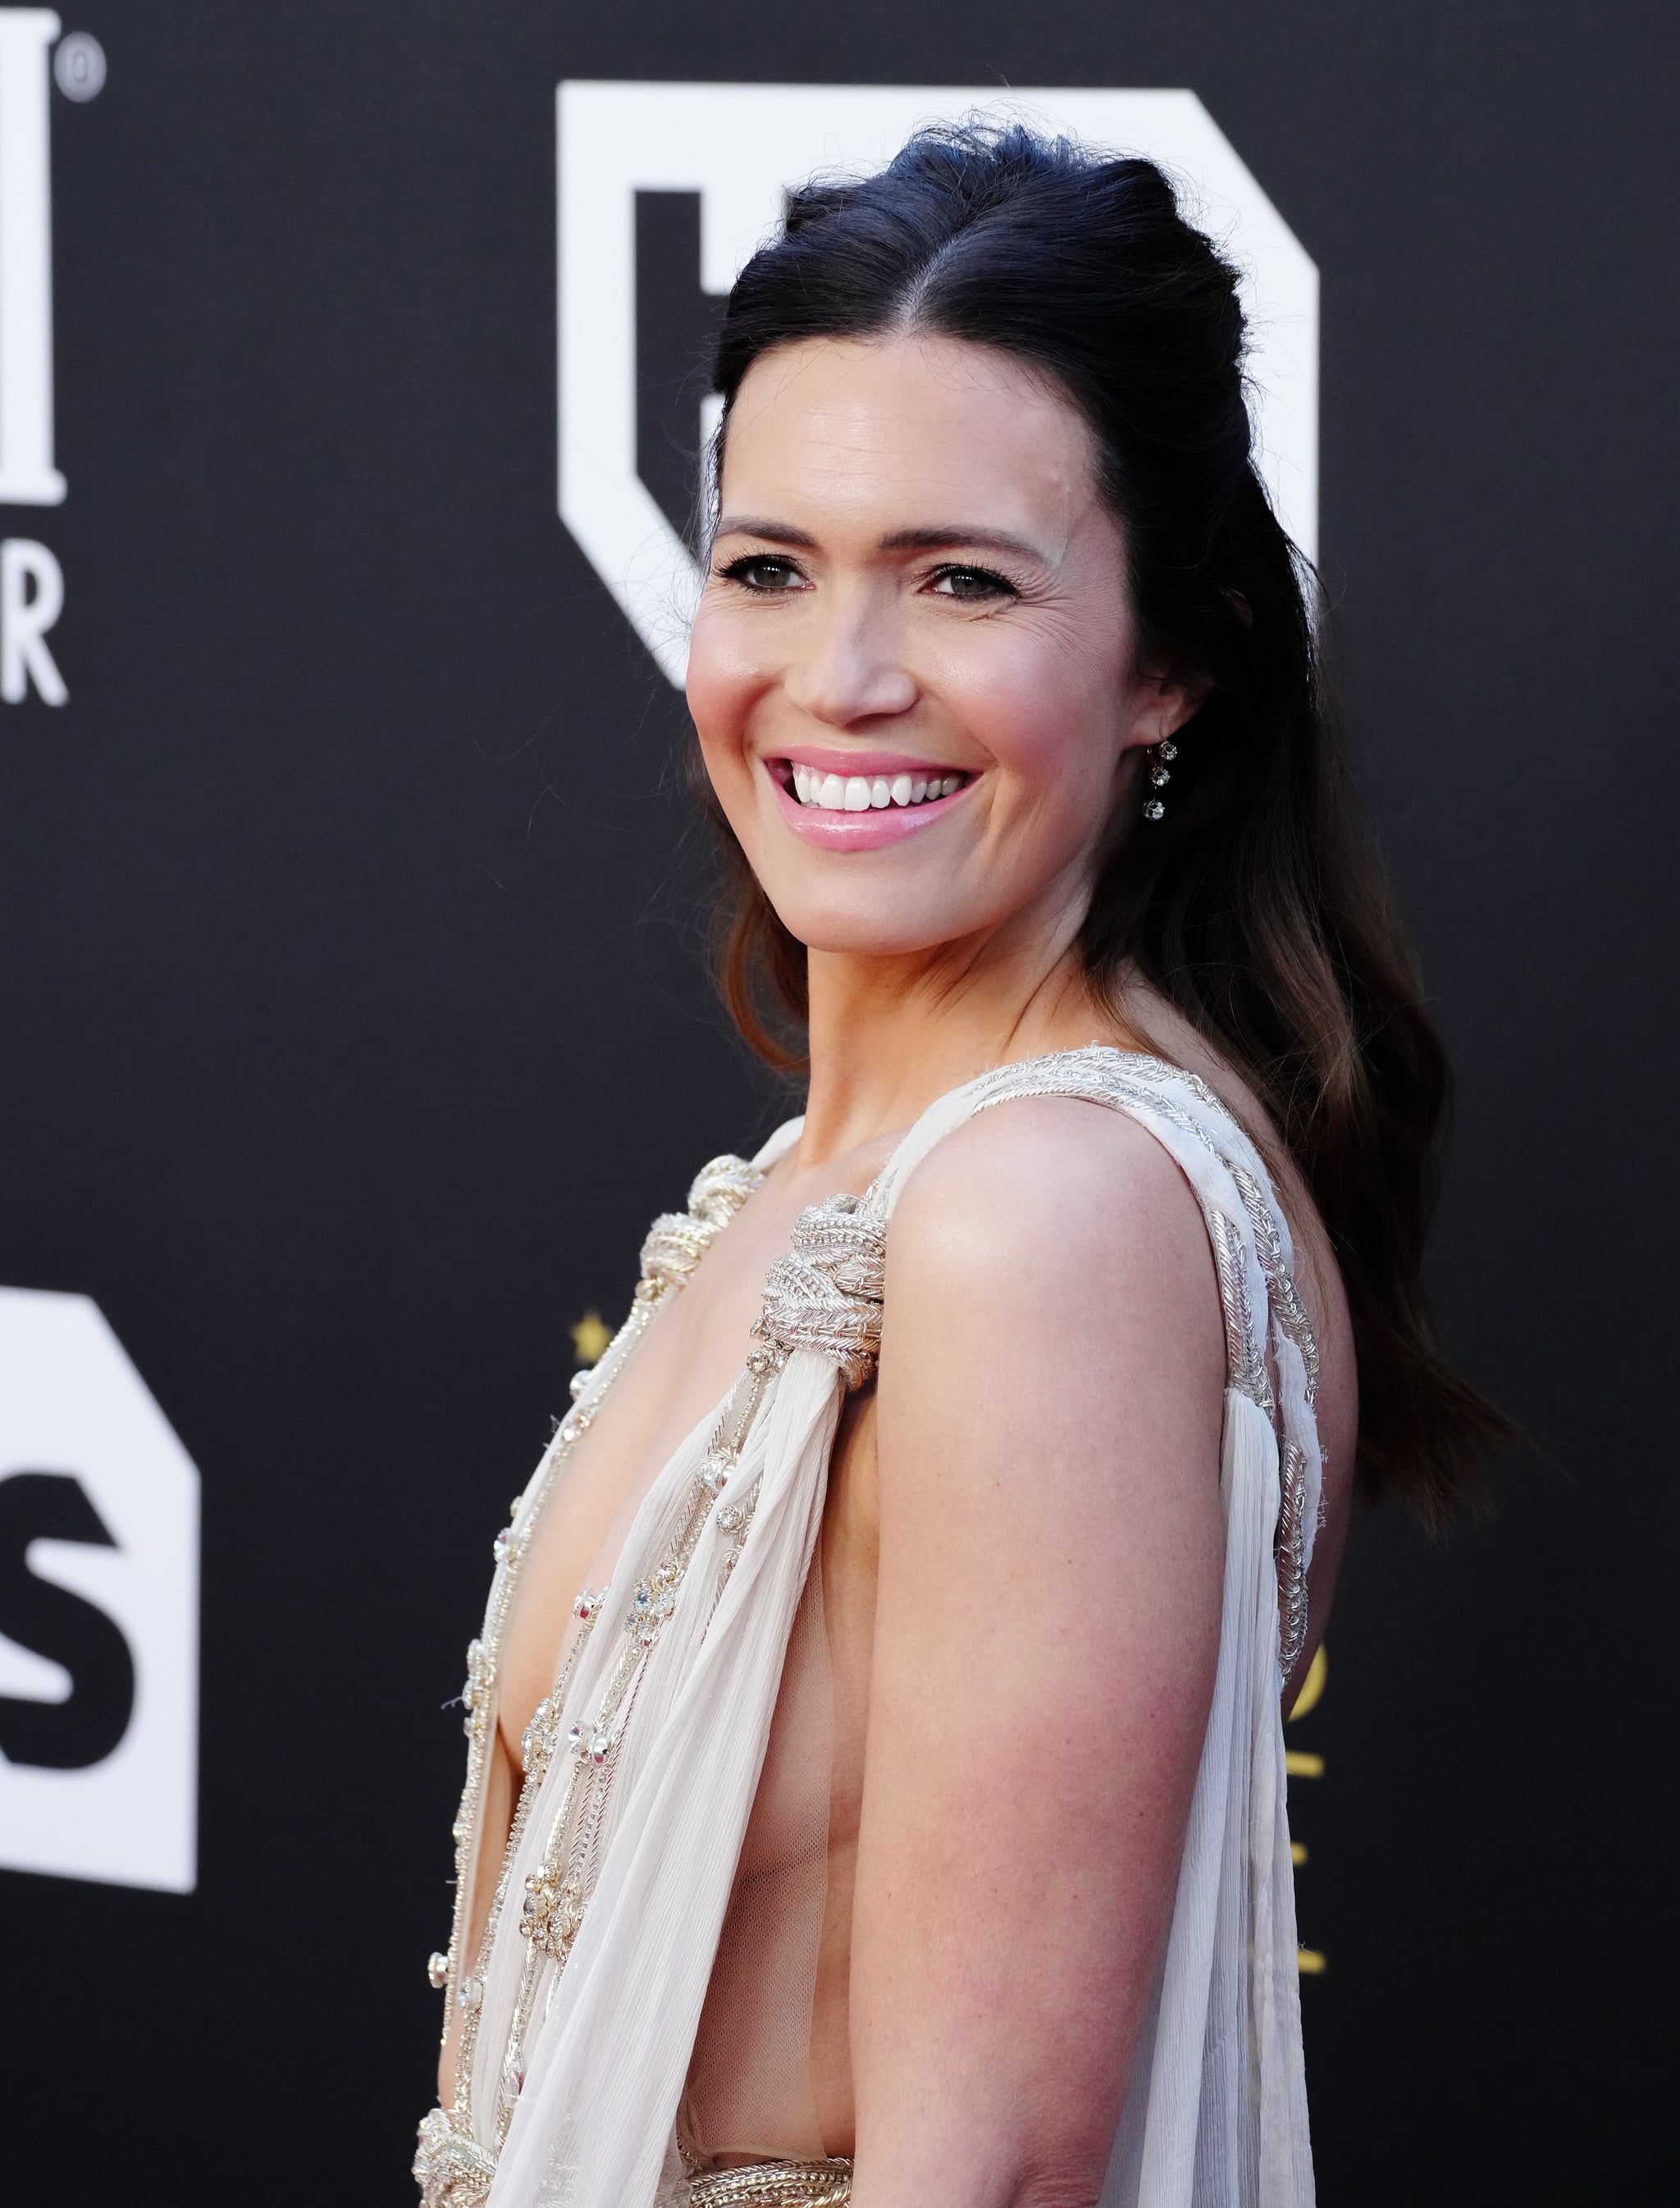 LOS ANGELES, CALIFORNIA - MARCH 13: Mandy Moore attends the 27th Annual Critics Choice Awards at Fairmont Century Plaza on March 13, 2022 in Los Angeles, California. (Photo by Jeff Kravitz/FilmMagic)